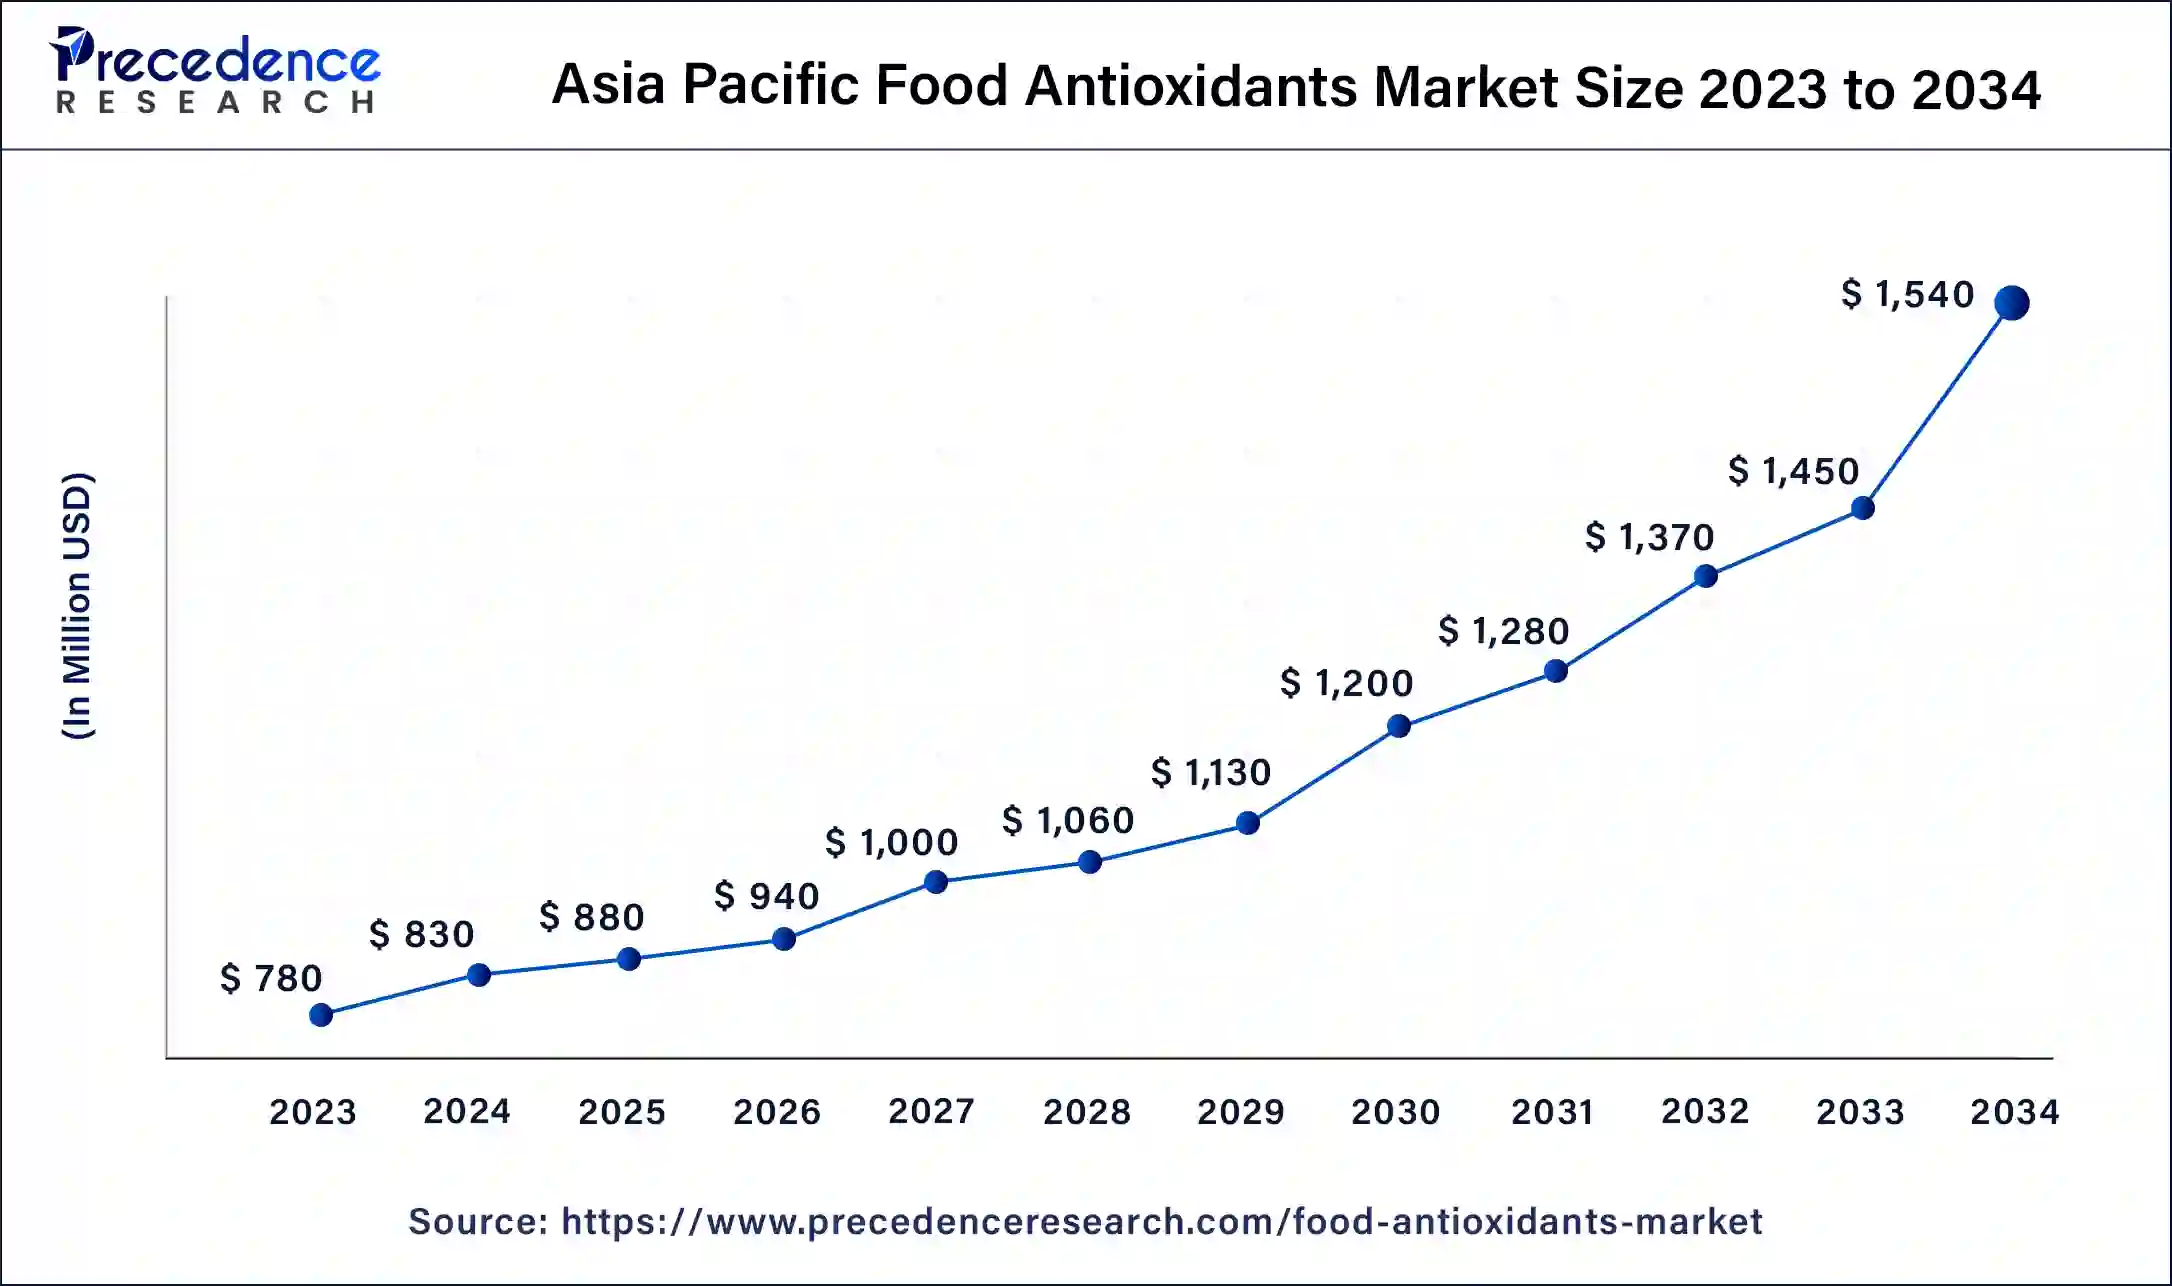 Asia Pacific Food Antioxidants Market Size 2024 to 2034